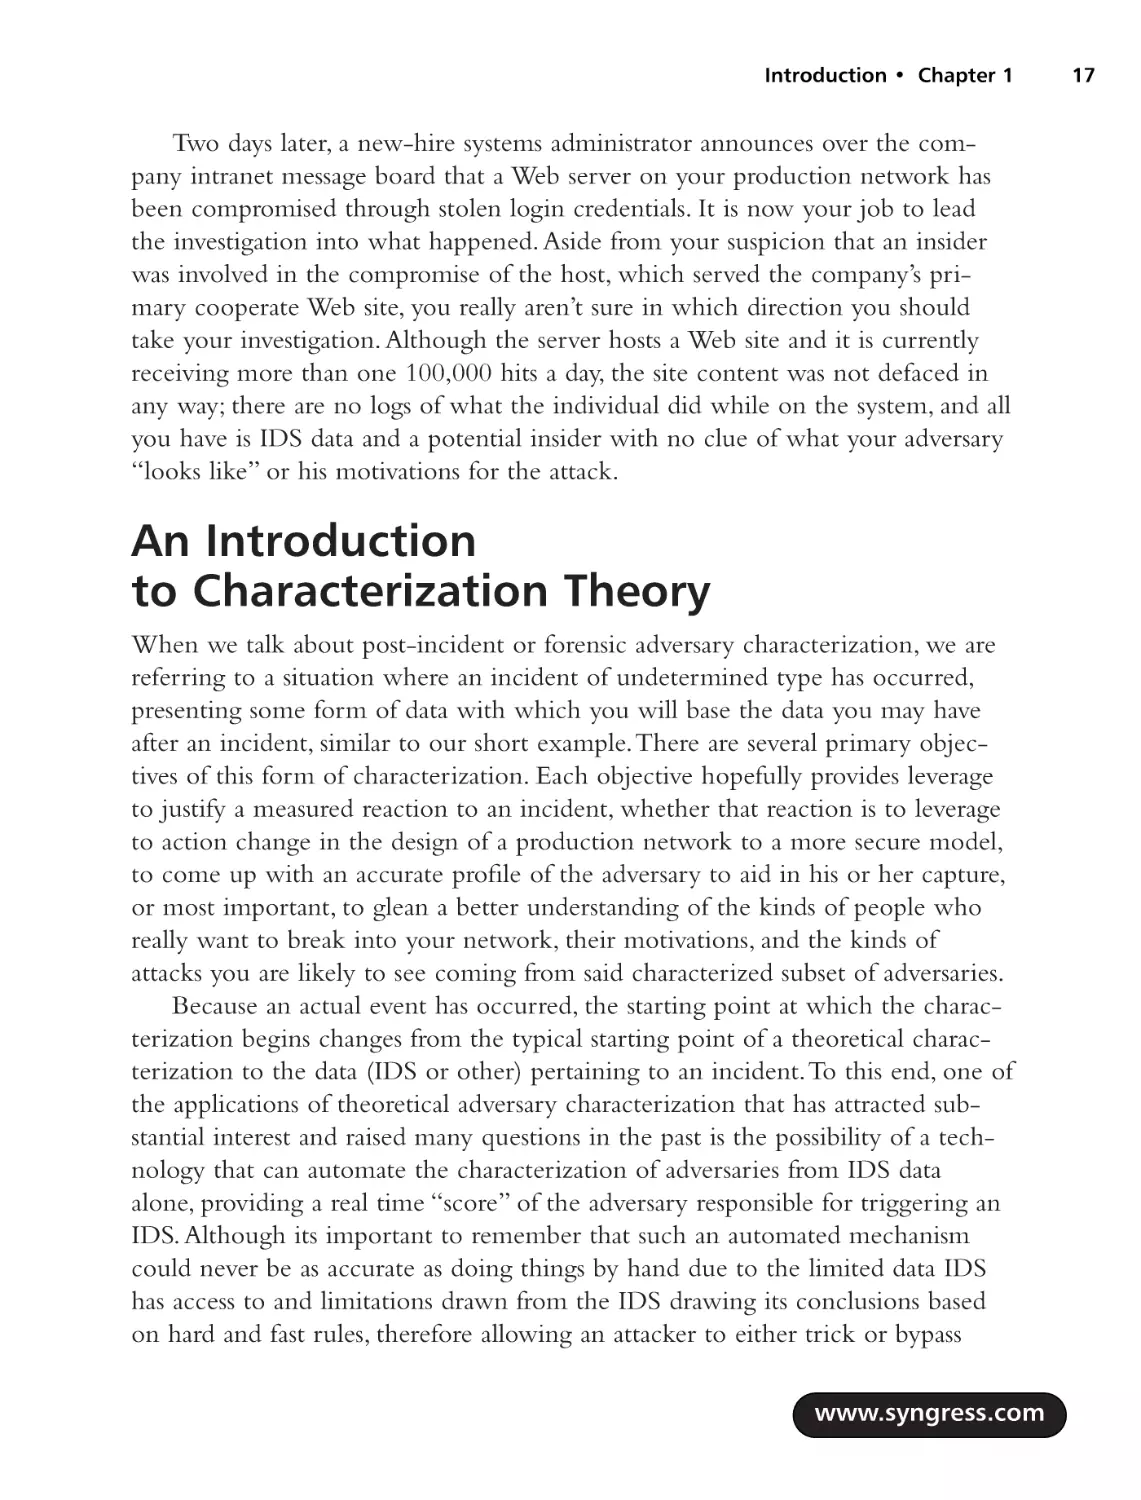 Introduction to Characterization Theory